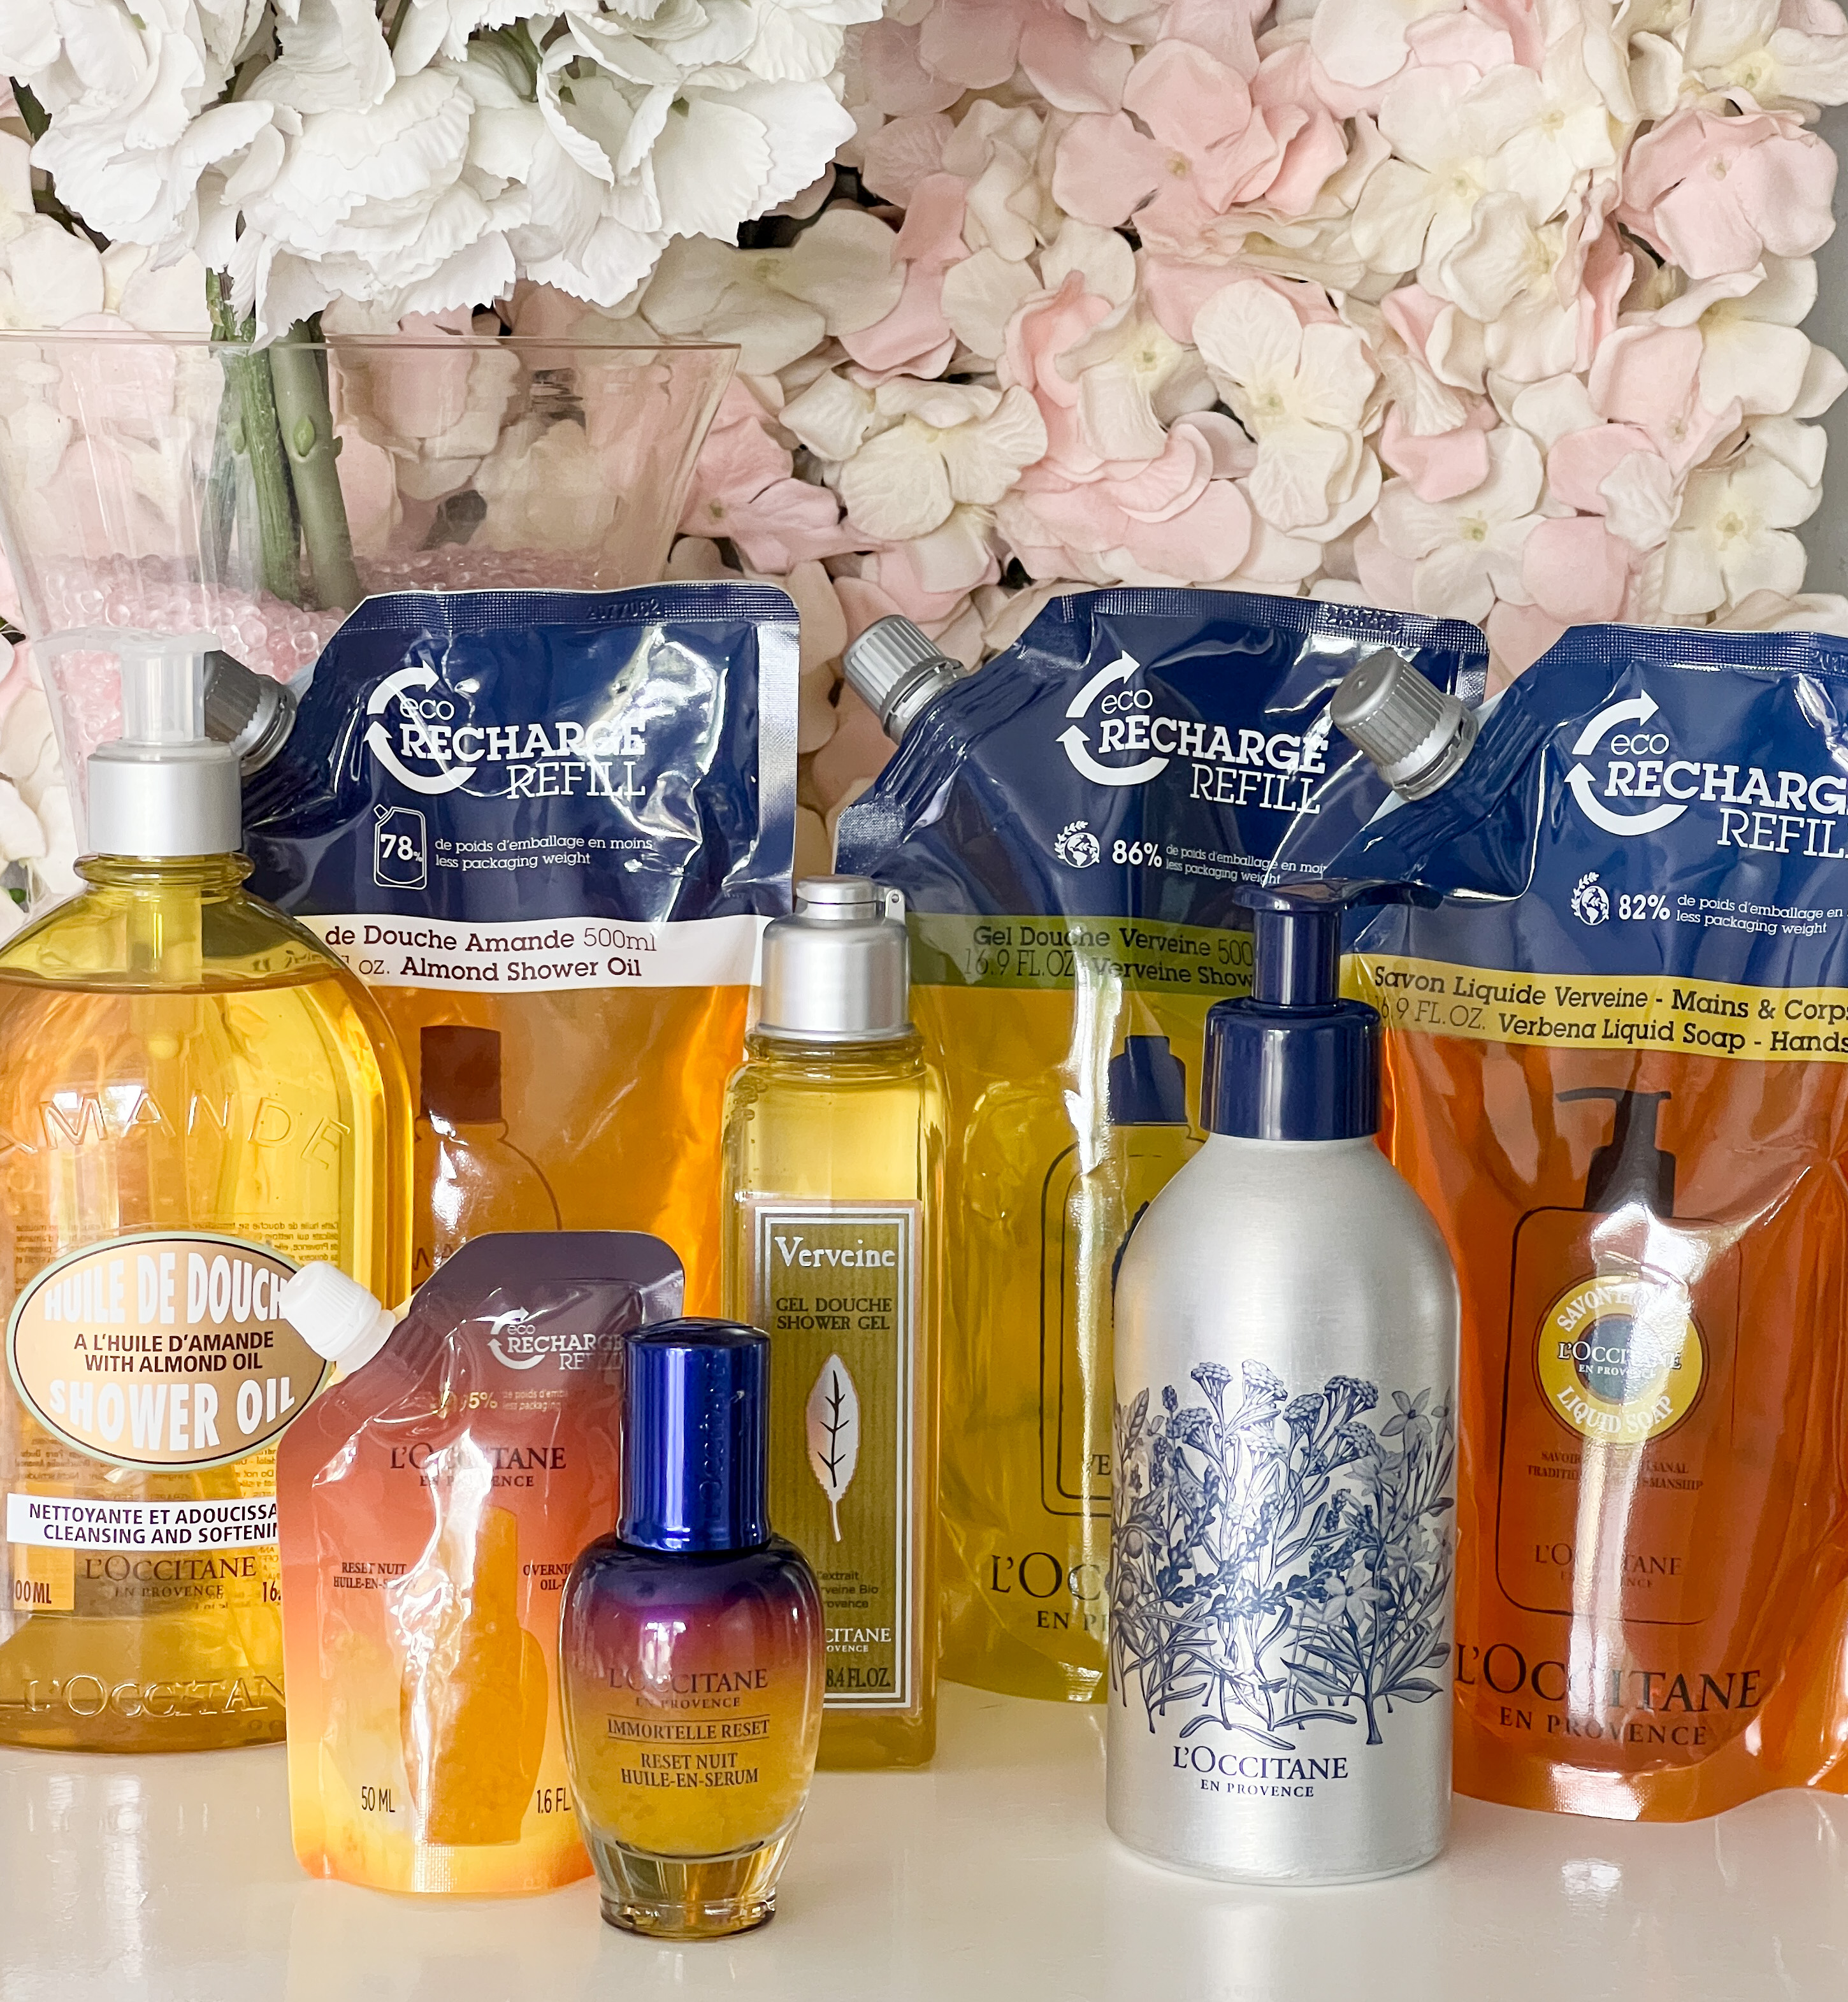 Refillable L'Occitane products